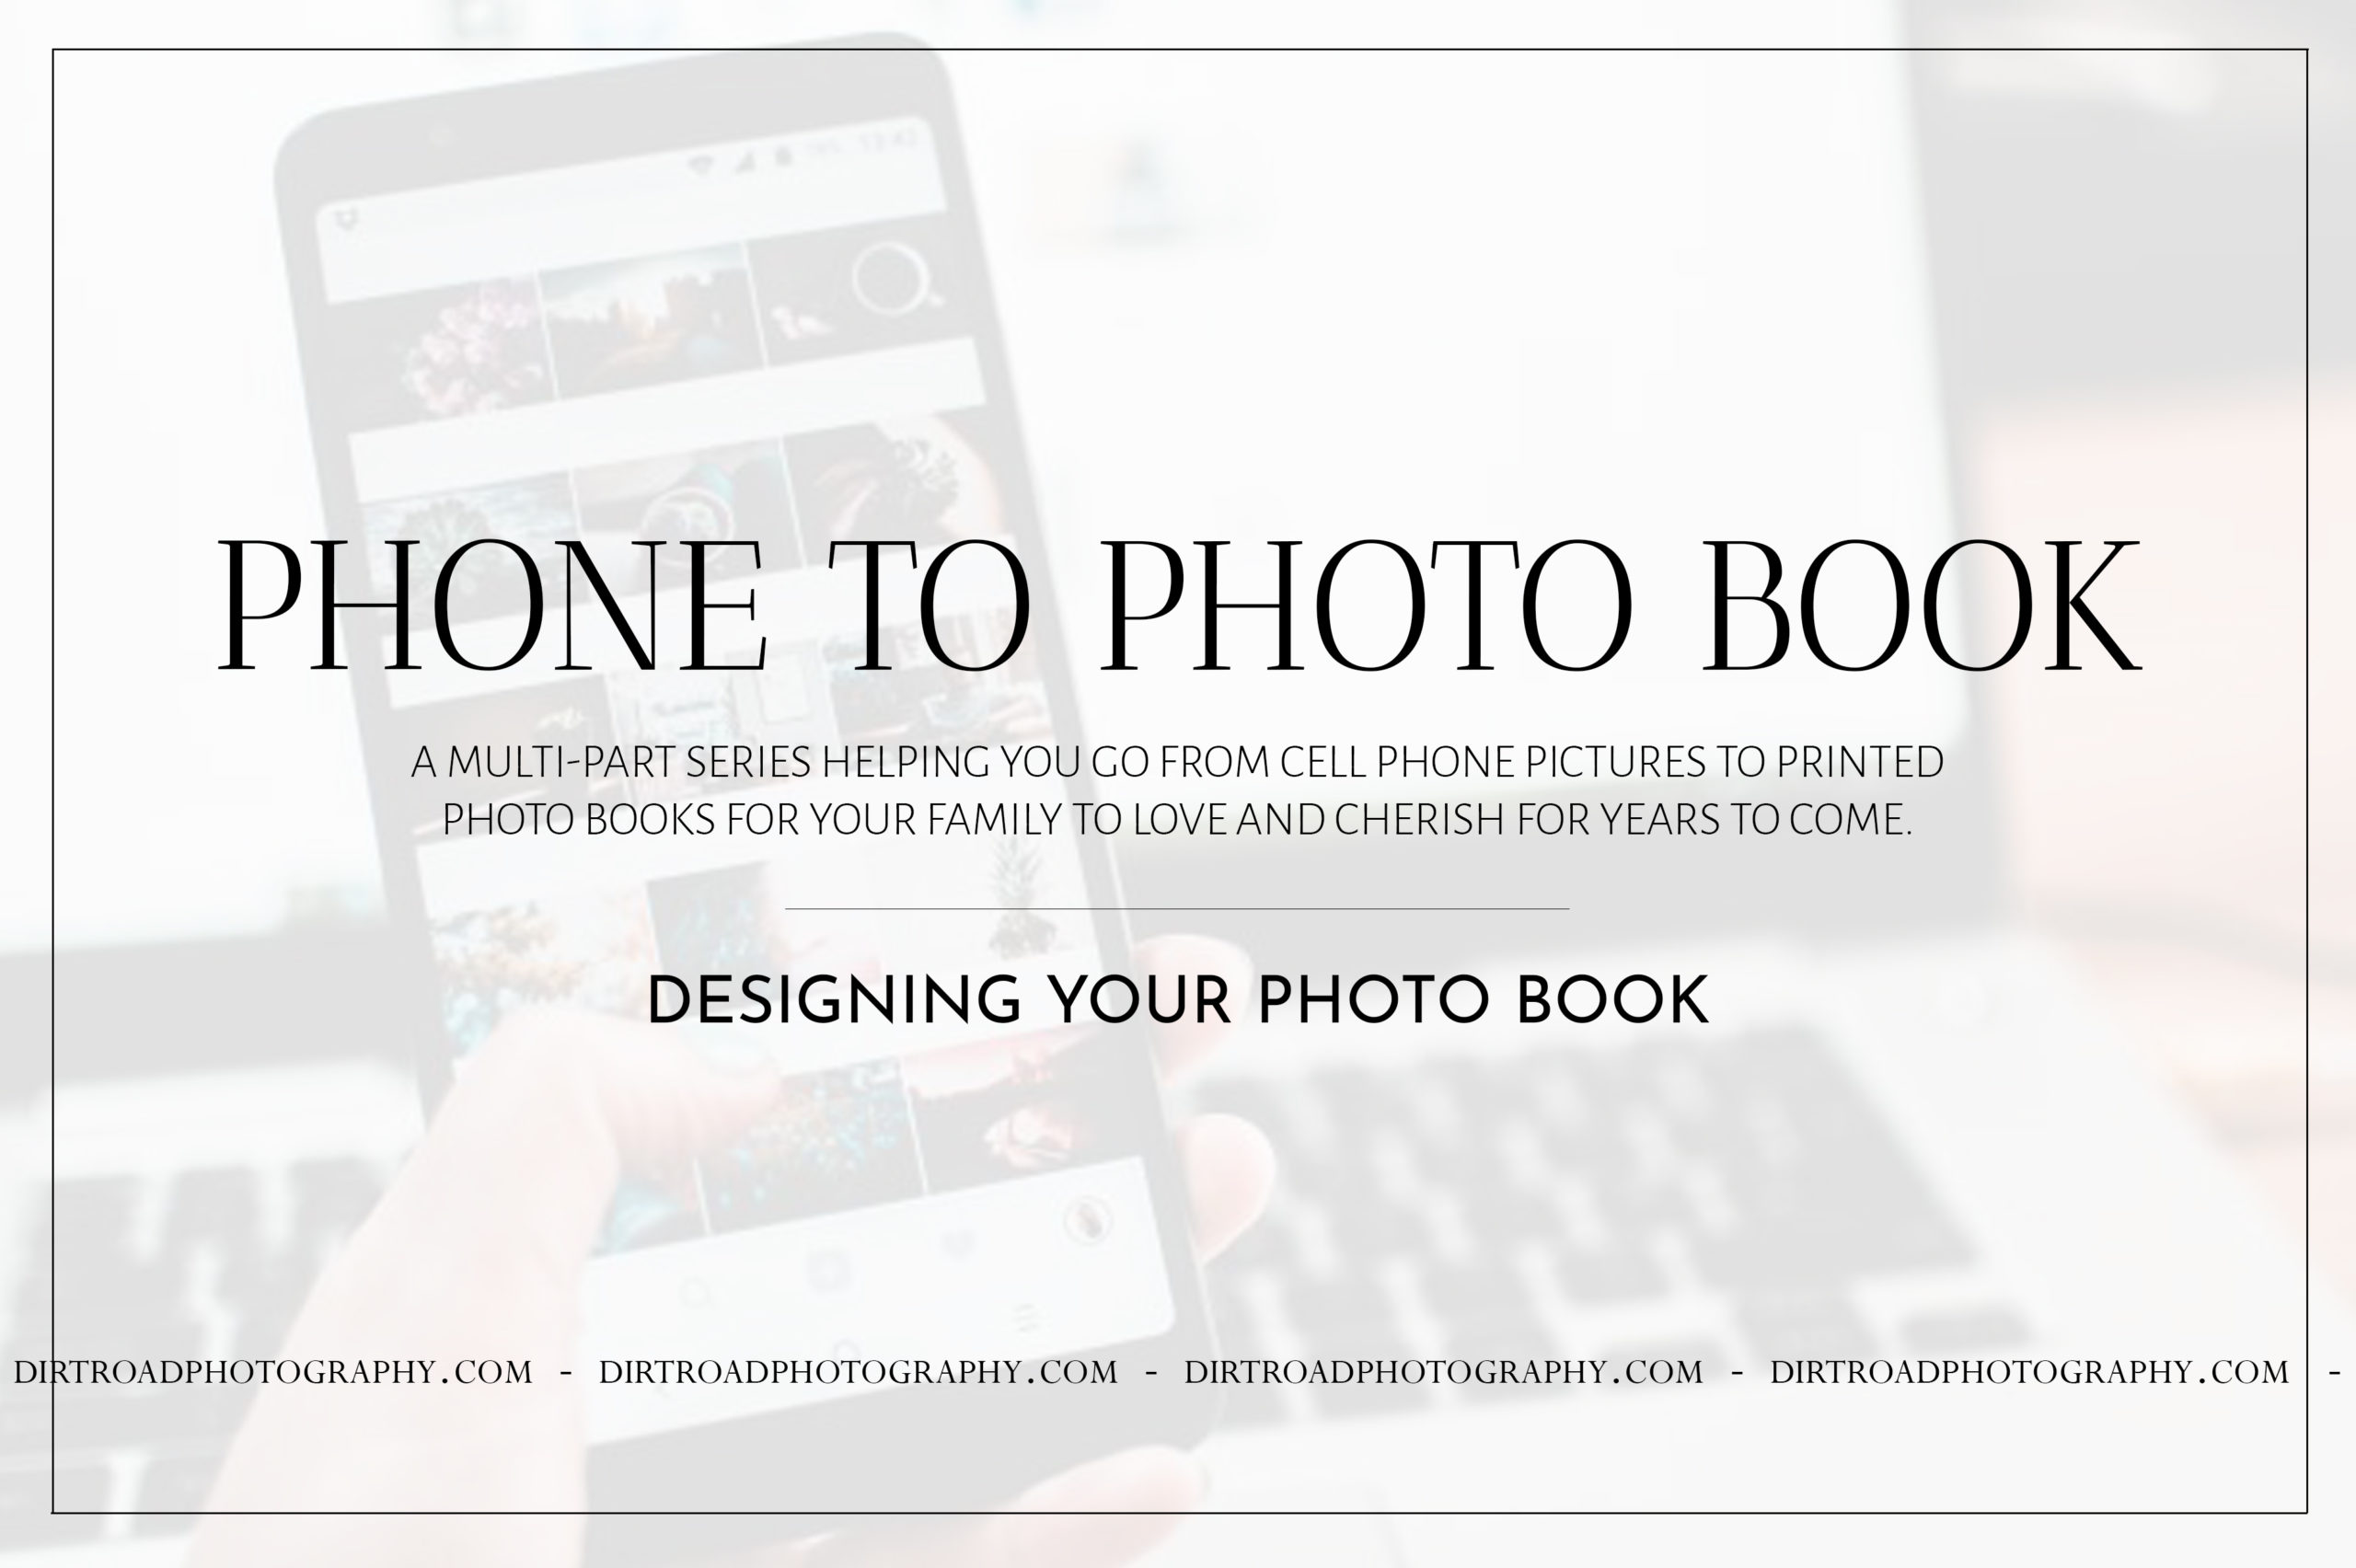 designing your book, phone to photobook series on how to turn your phone photos into photo books.